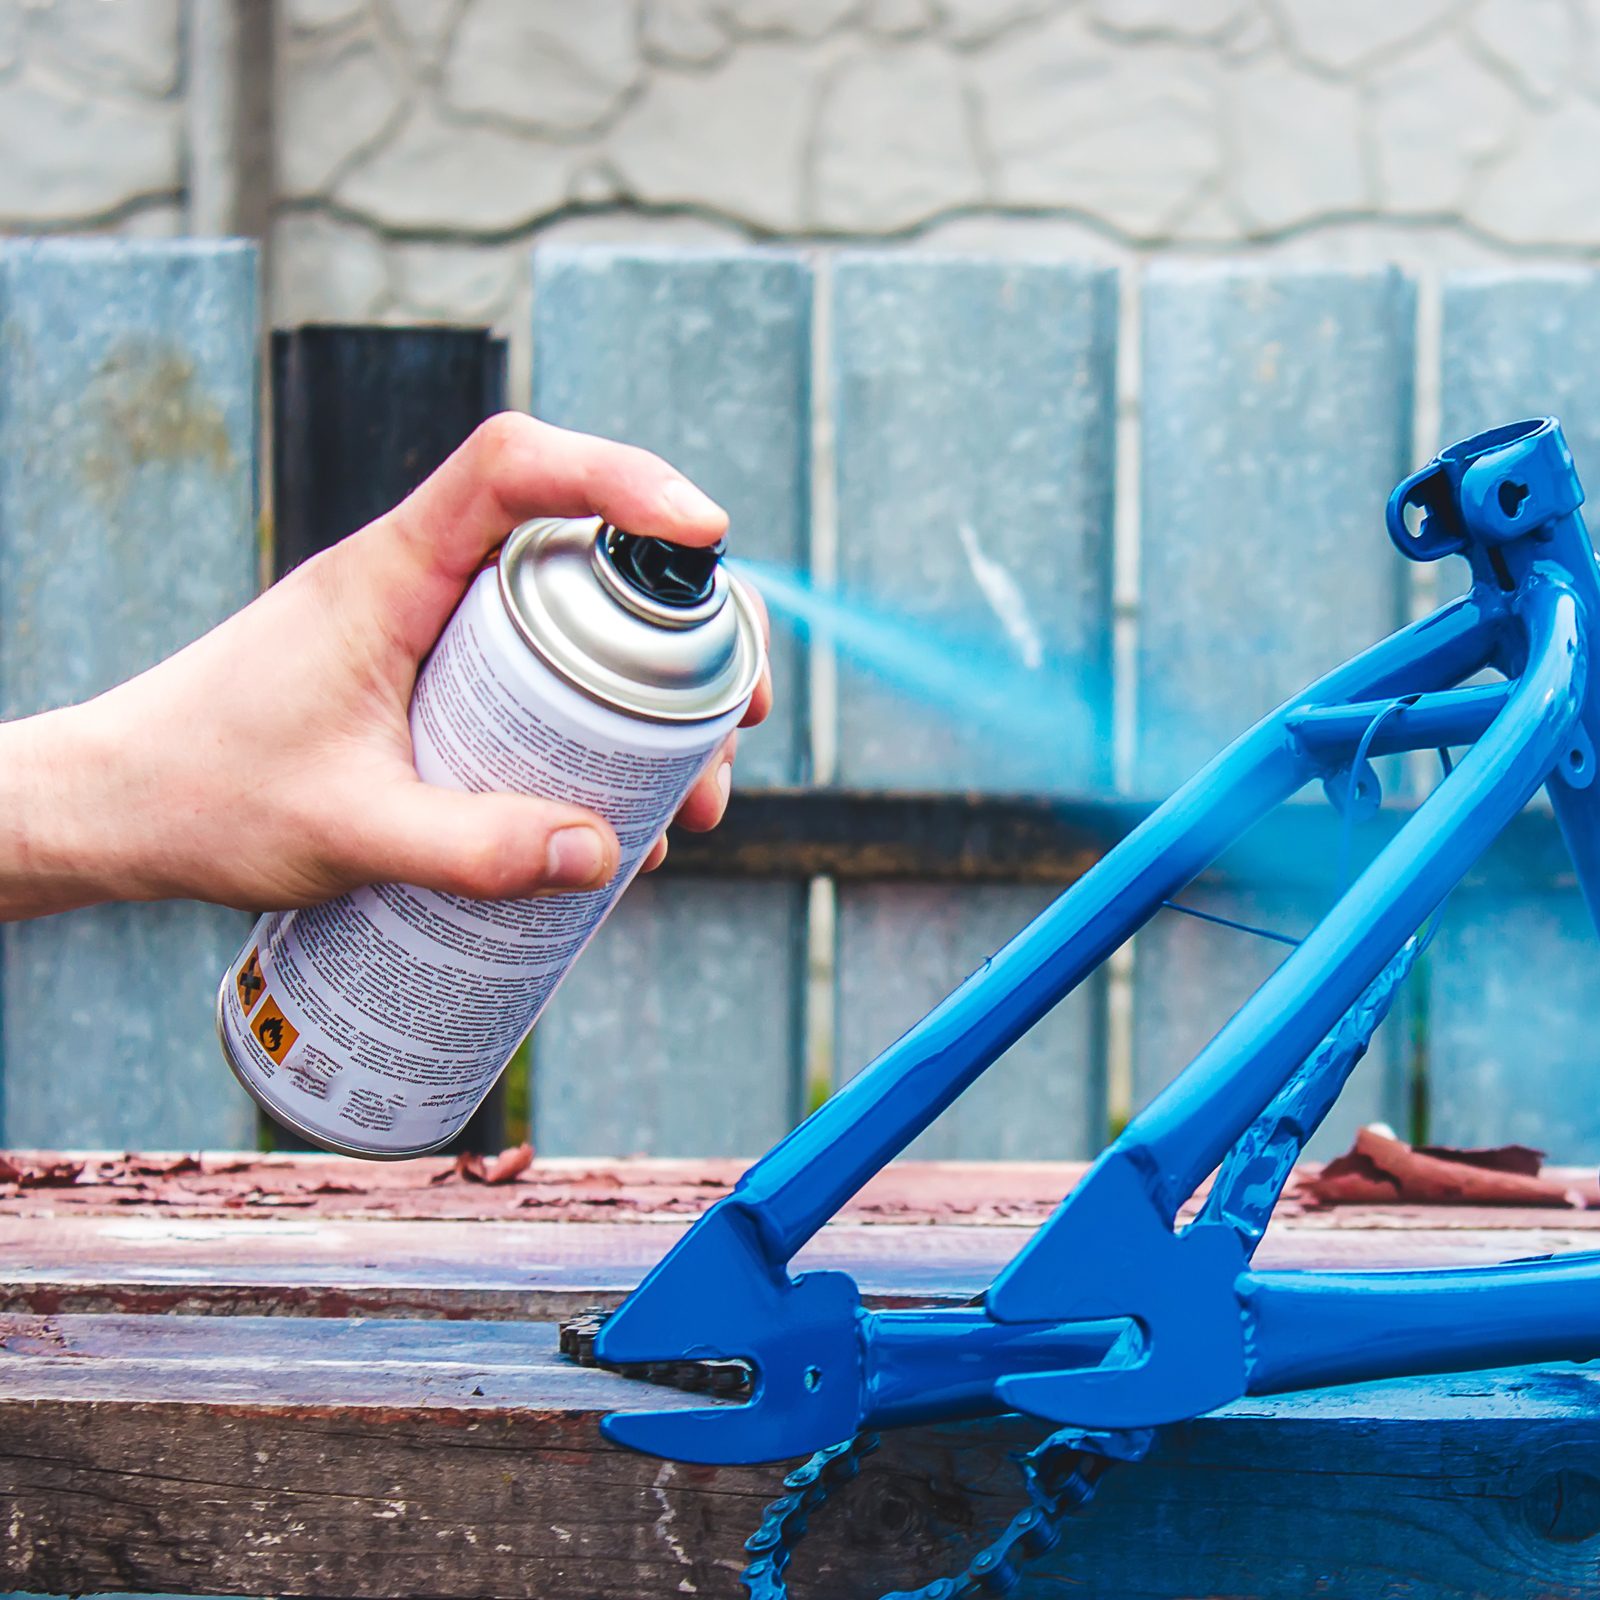 How To Spray Paint Safely